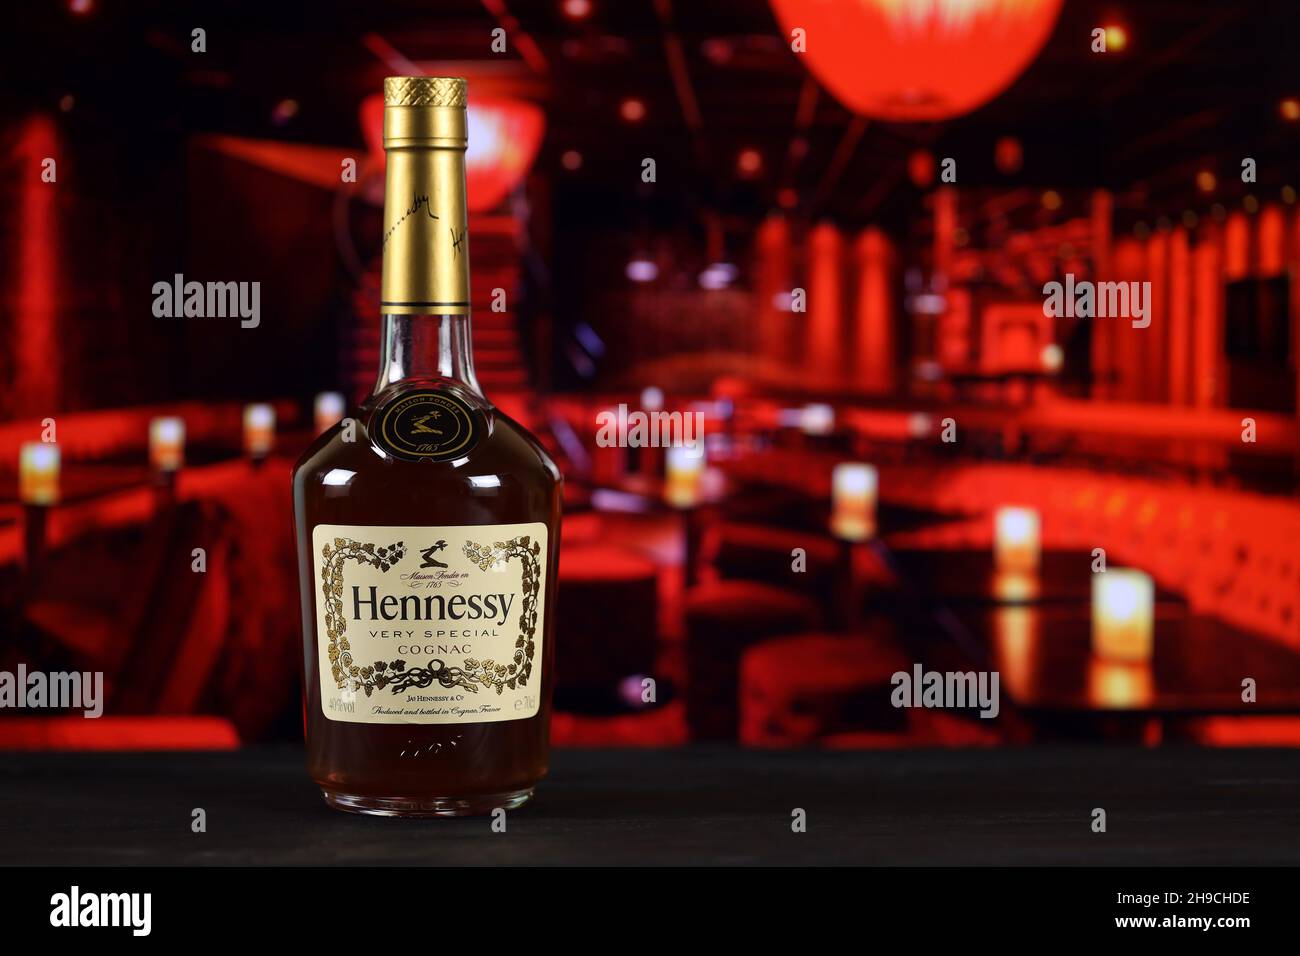 KHARKOV, UKRAINE - FEBRUARY 14, 2021: Hennessy very special cognac bottle on wooden table with red bar interior on background. Elite alcohol productio Stock Photo